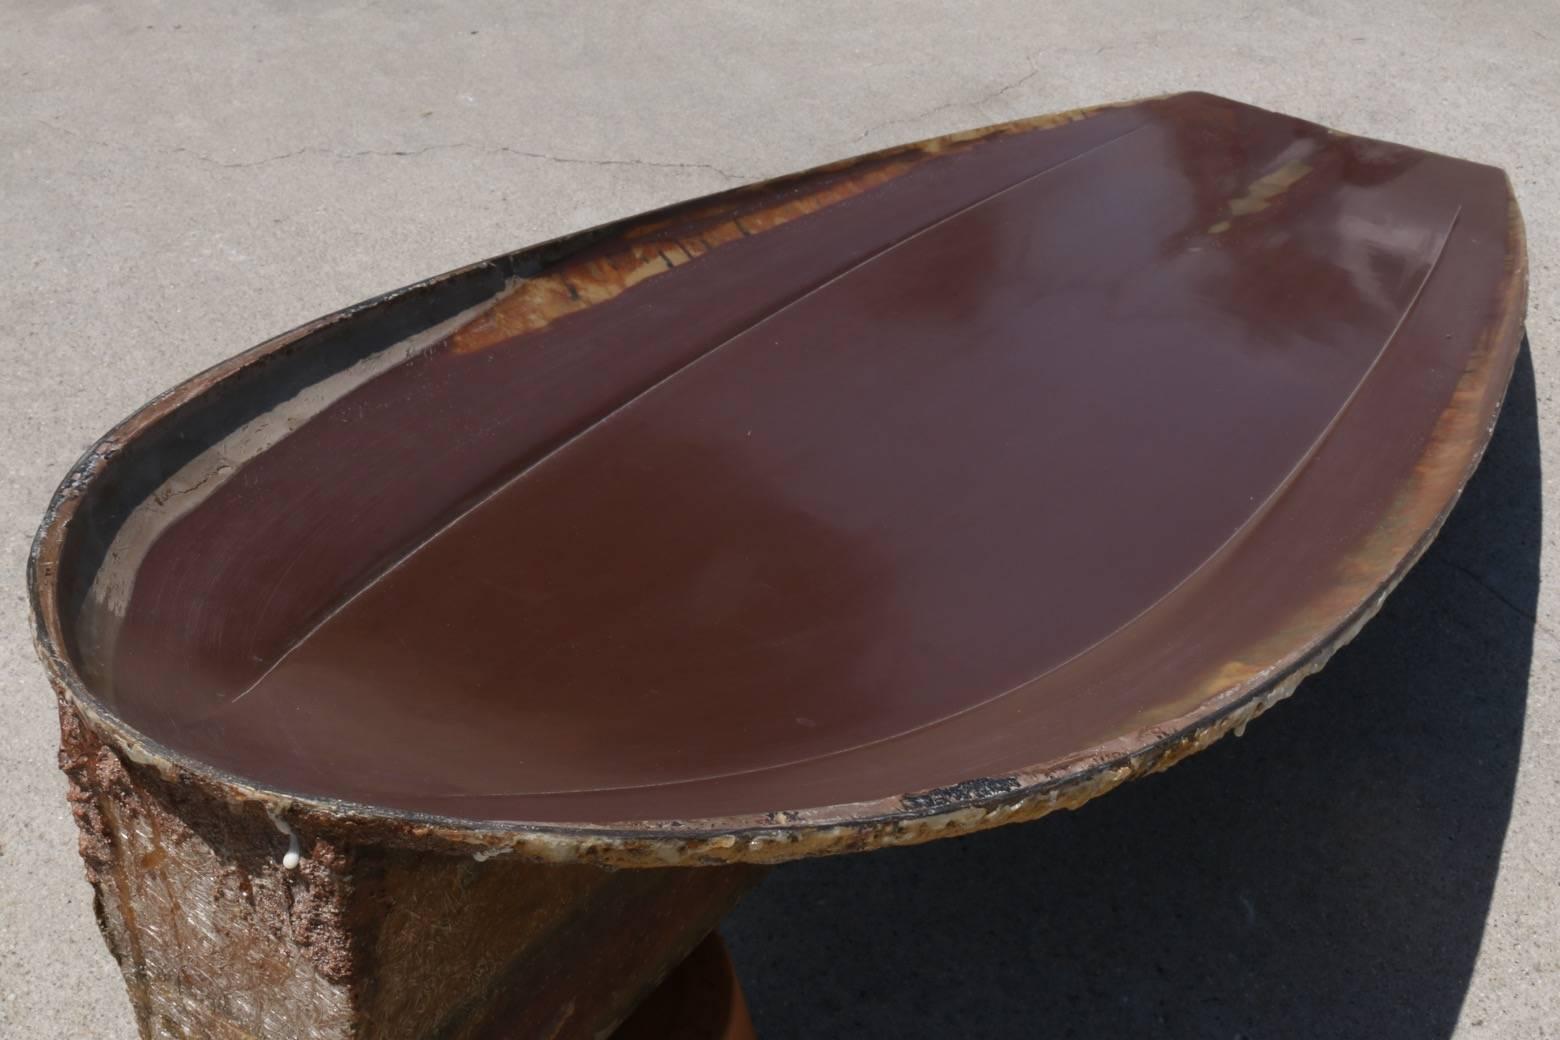 This early 1970s George Greenough Spoon Kneeboard mold, authenticated by Greenough himself is one of the rarest surf items on sale anywhere. For the surf collector or surf shacks decorator who wants a true piece of surf history to display in their